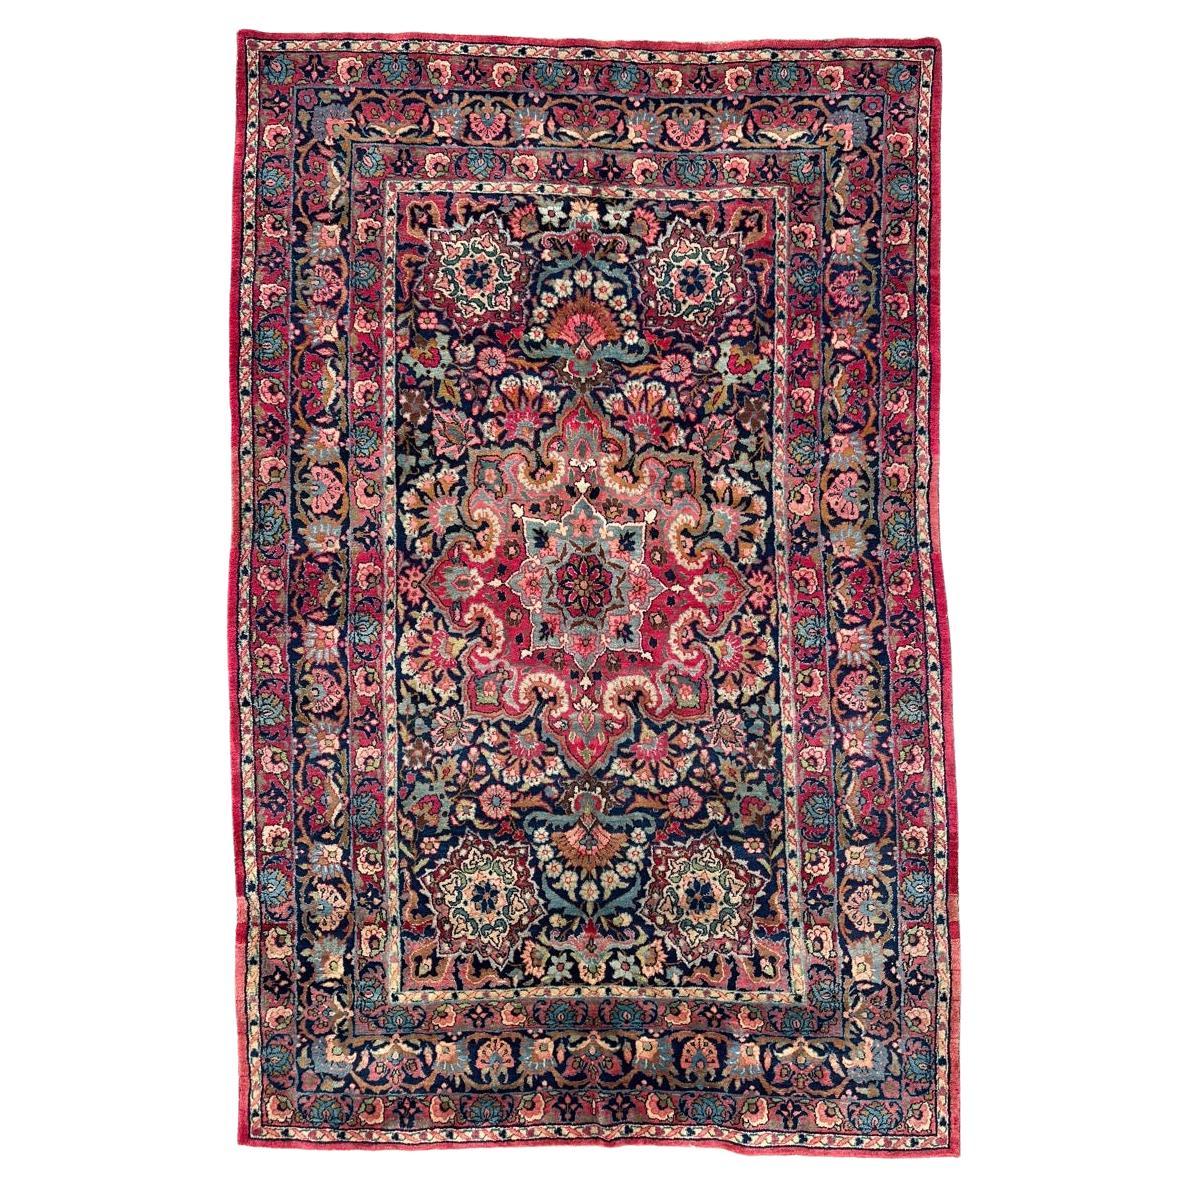 Bobyrug’s magnificent antique 19th century Isfahan rug 